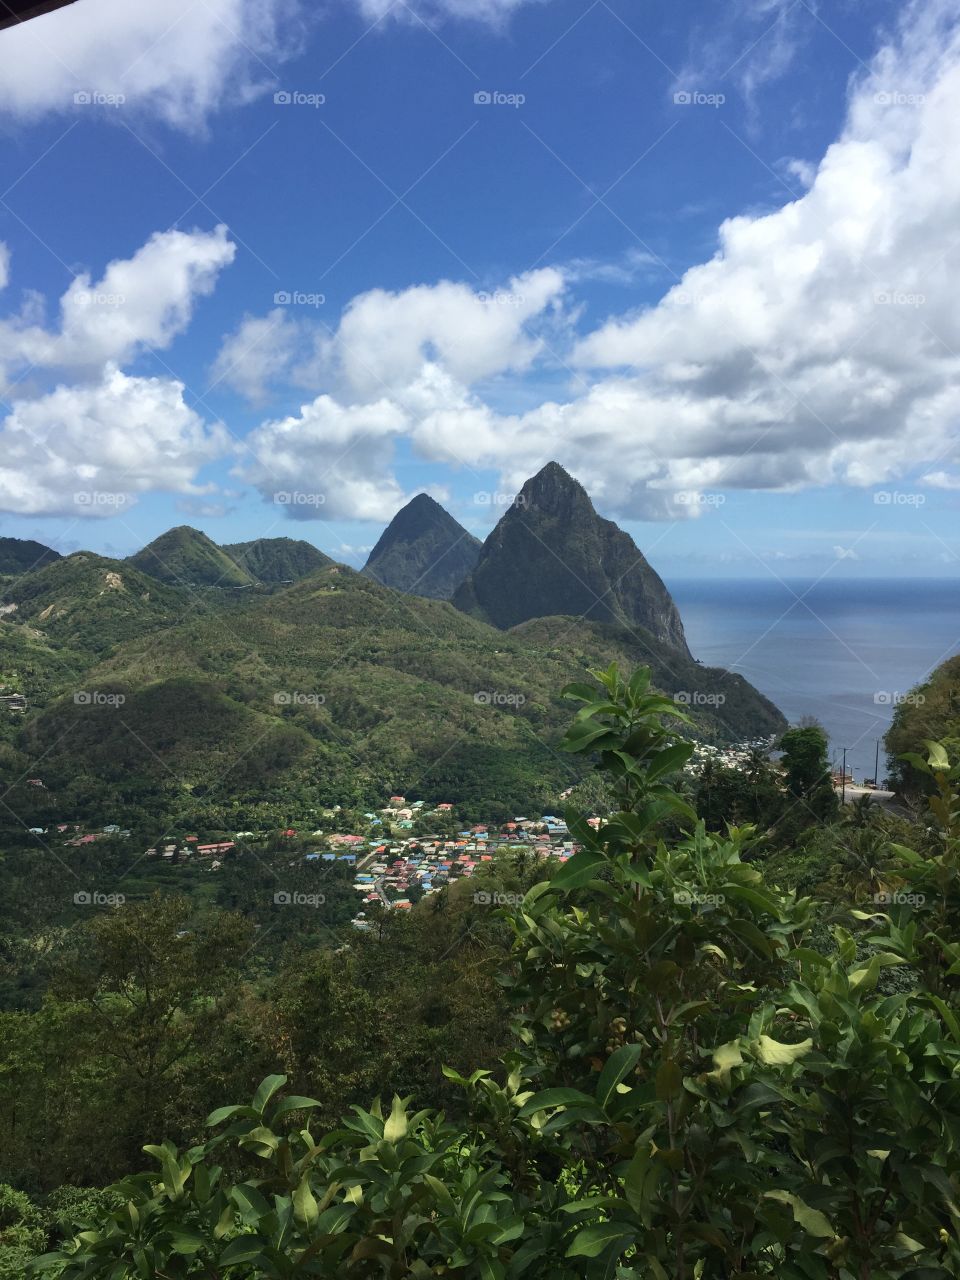 Overlooking a fishing village Pitons in St. Lucia